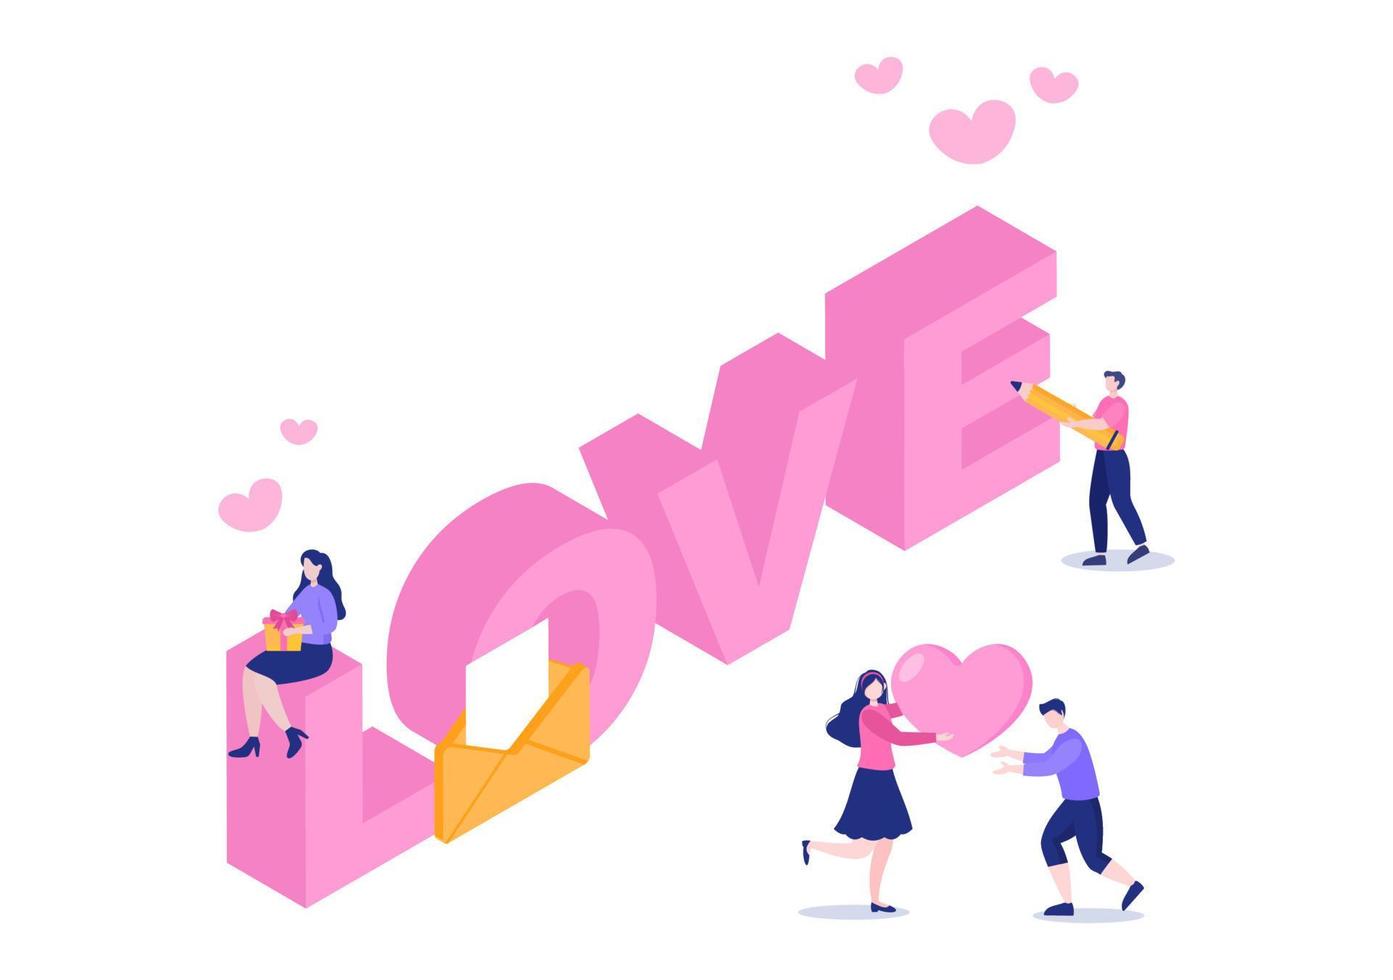 Love Letter Background Flat Illustration for Messages of Love  Fraternity or Friendship in Pink Color Usually Given on Valentine's Day in an Envelope or Greeting Card vector